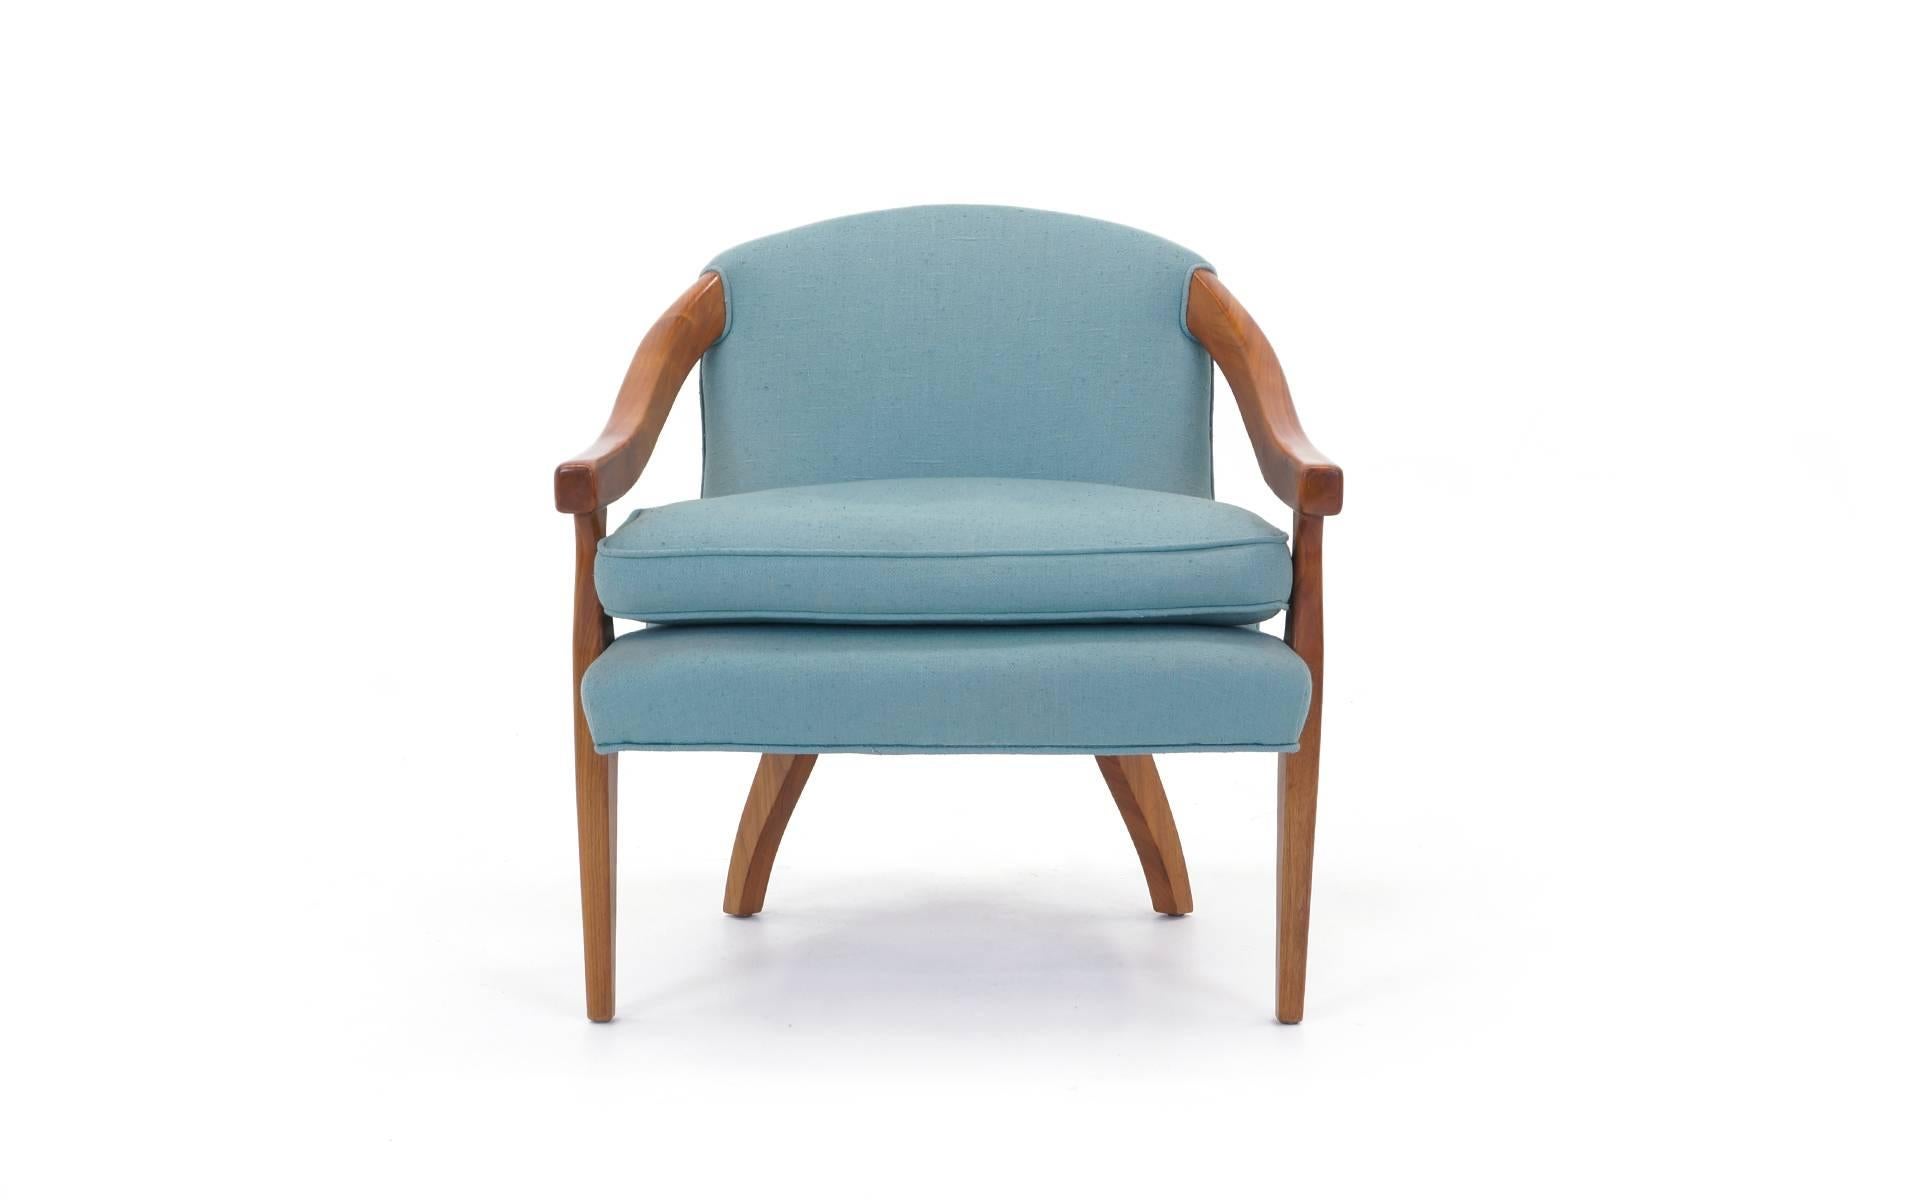 Stylish occasional chair in light blue fabric and walnut frame. Manufactured by Baker.